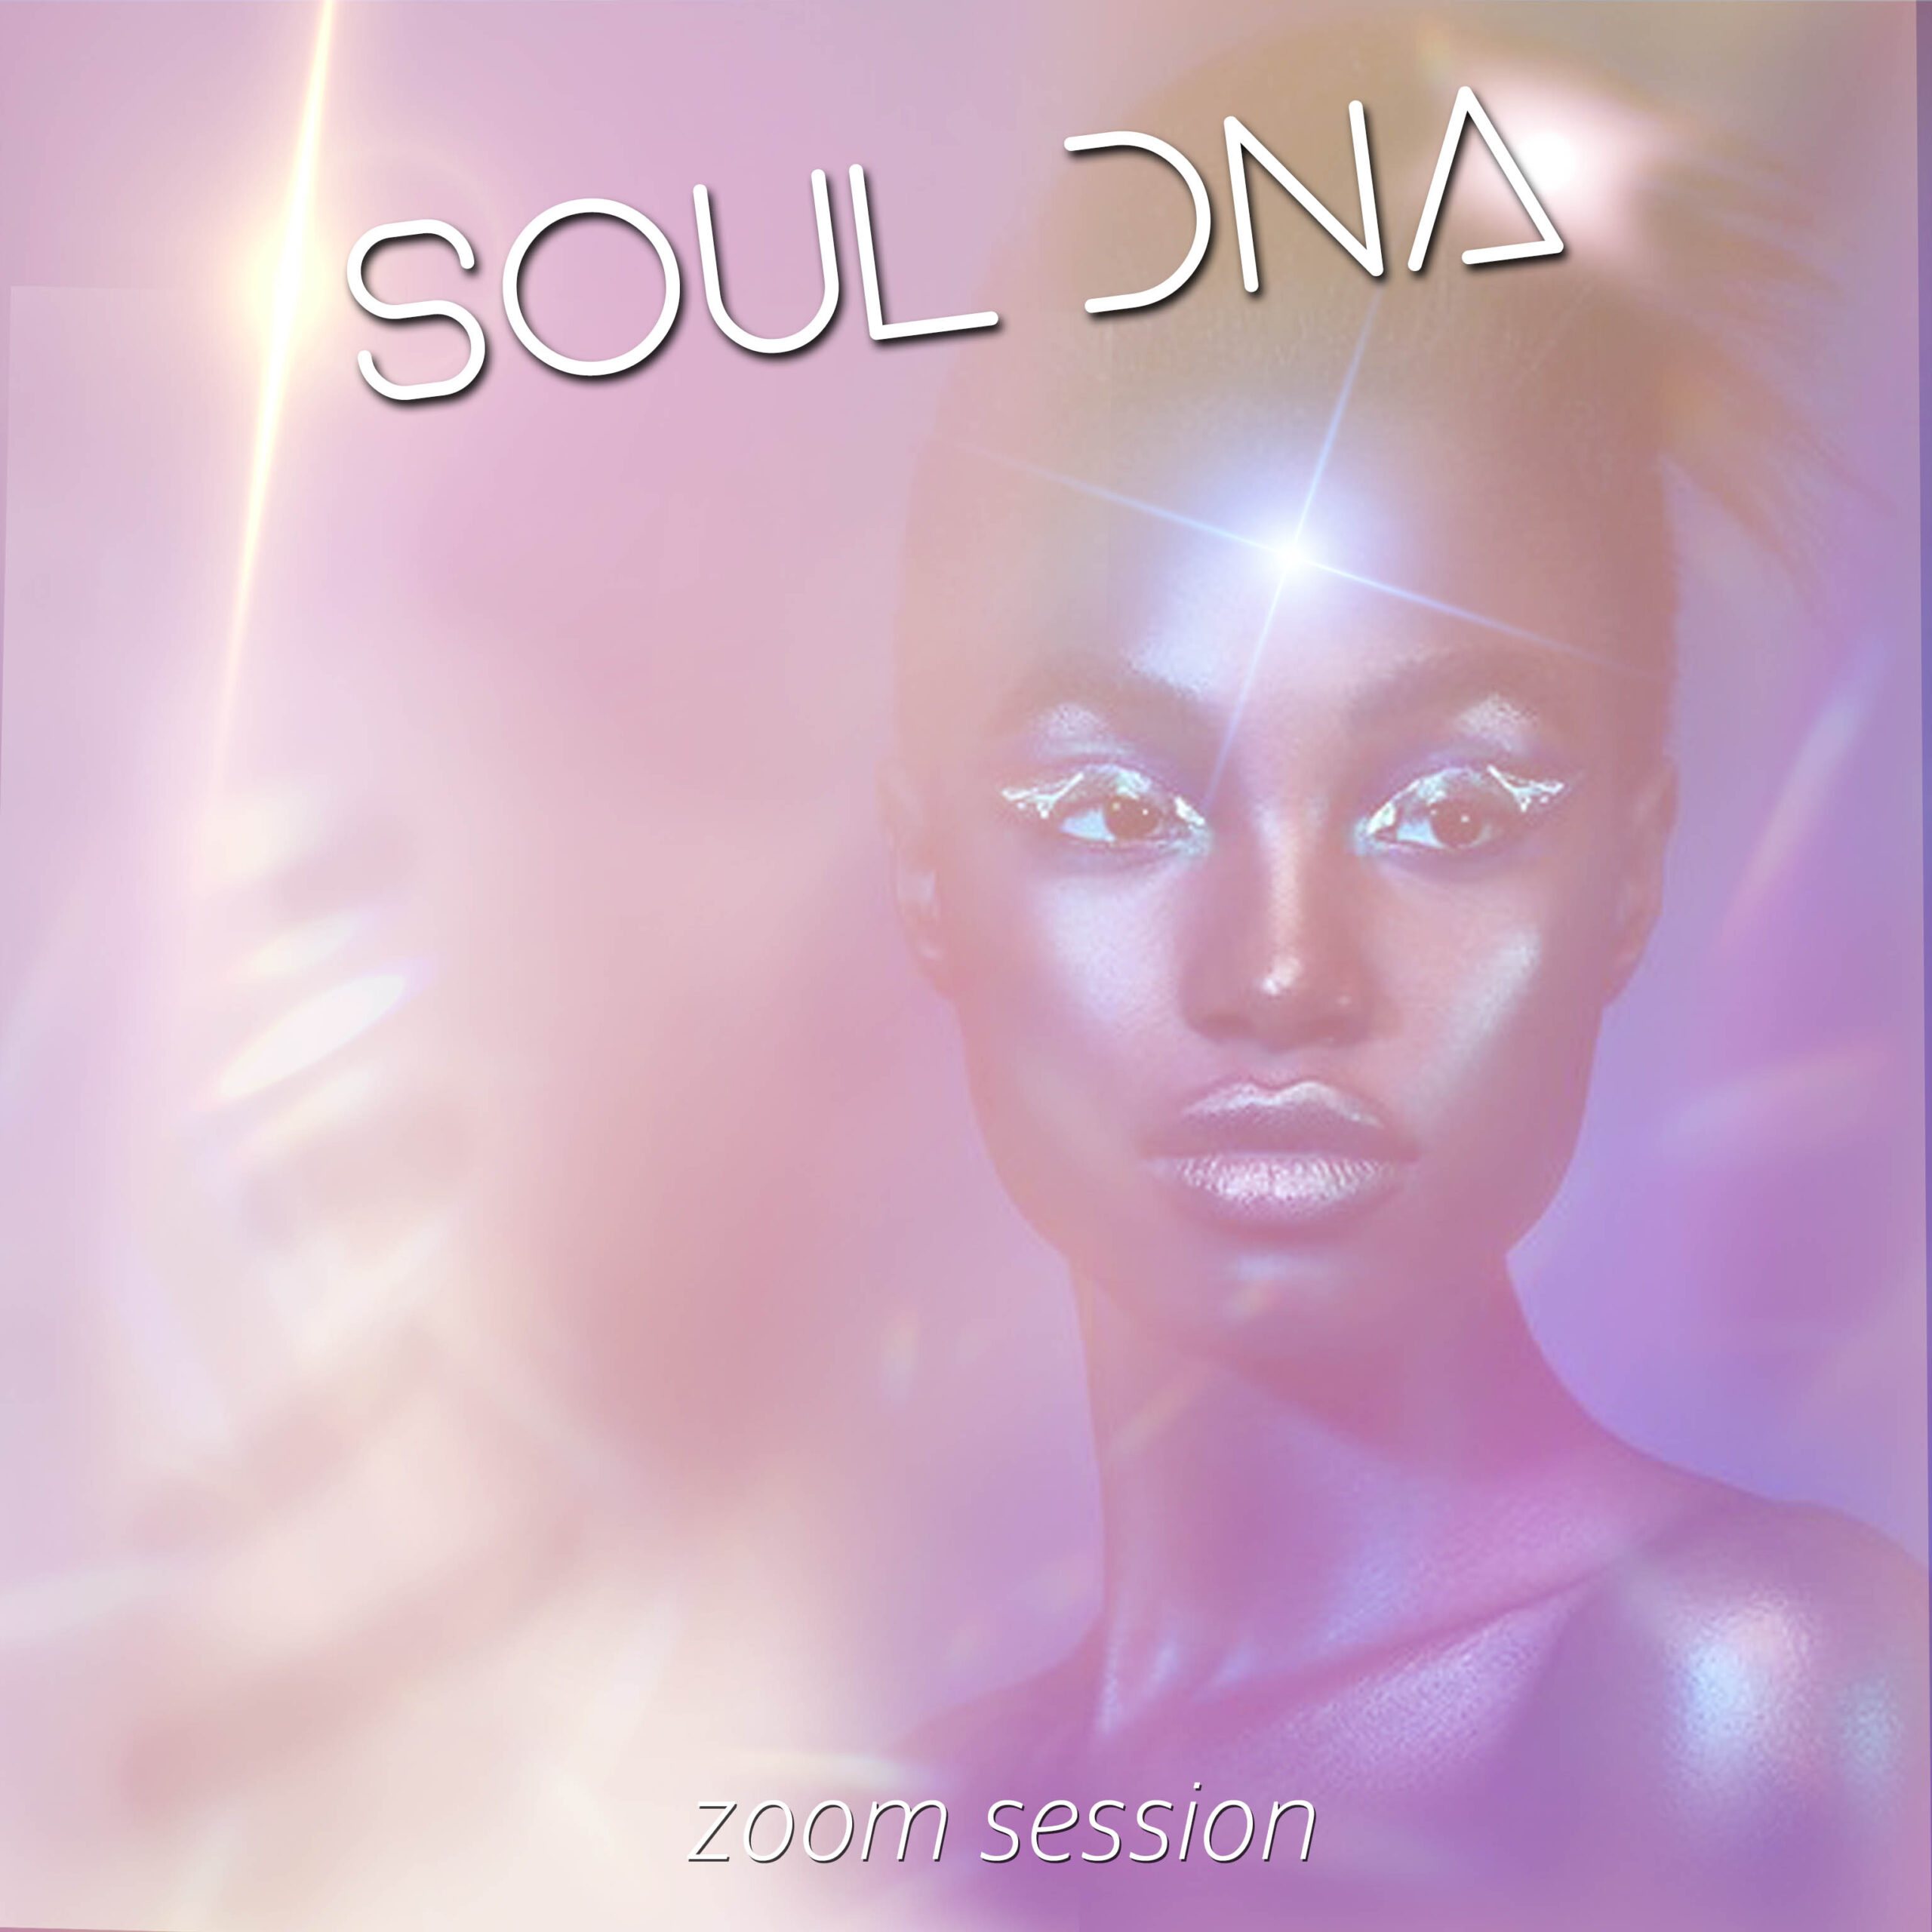 Soul DNA Session with Alessandra Gilioli